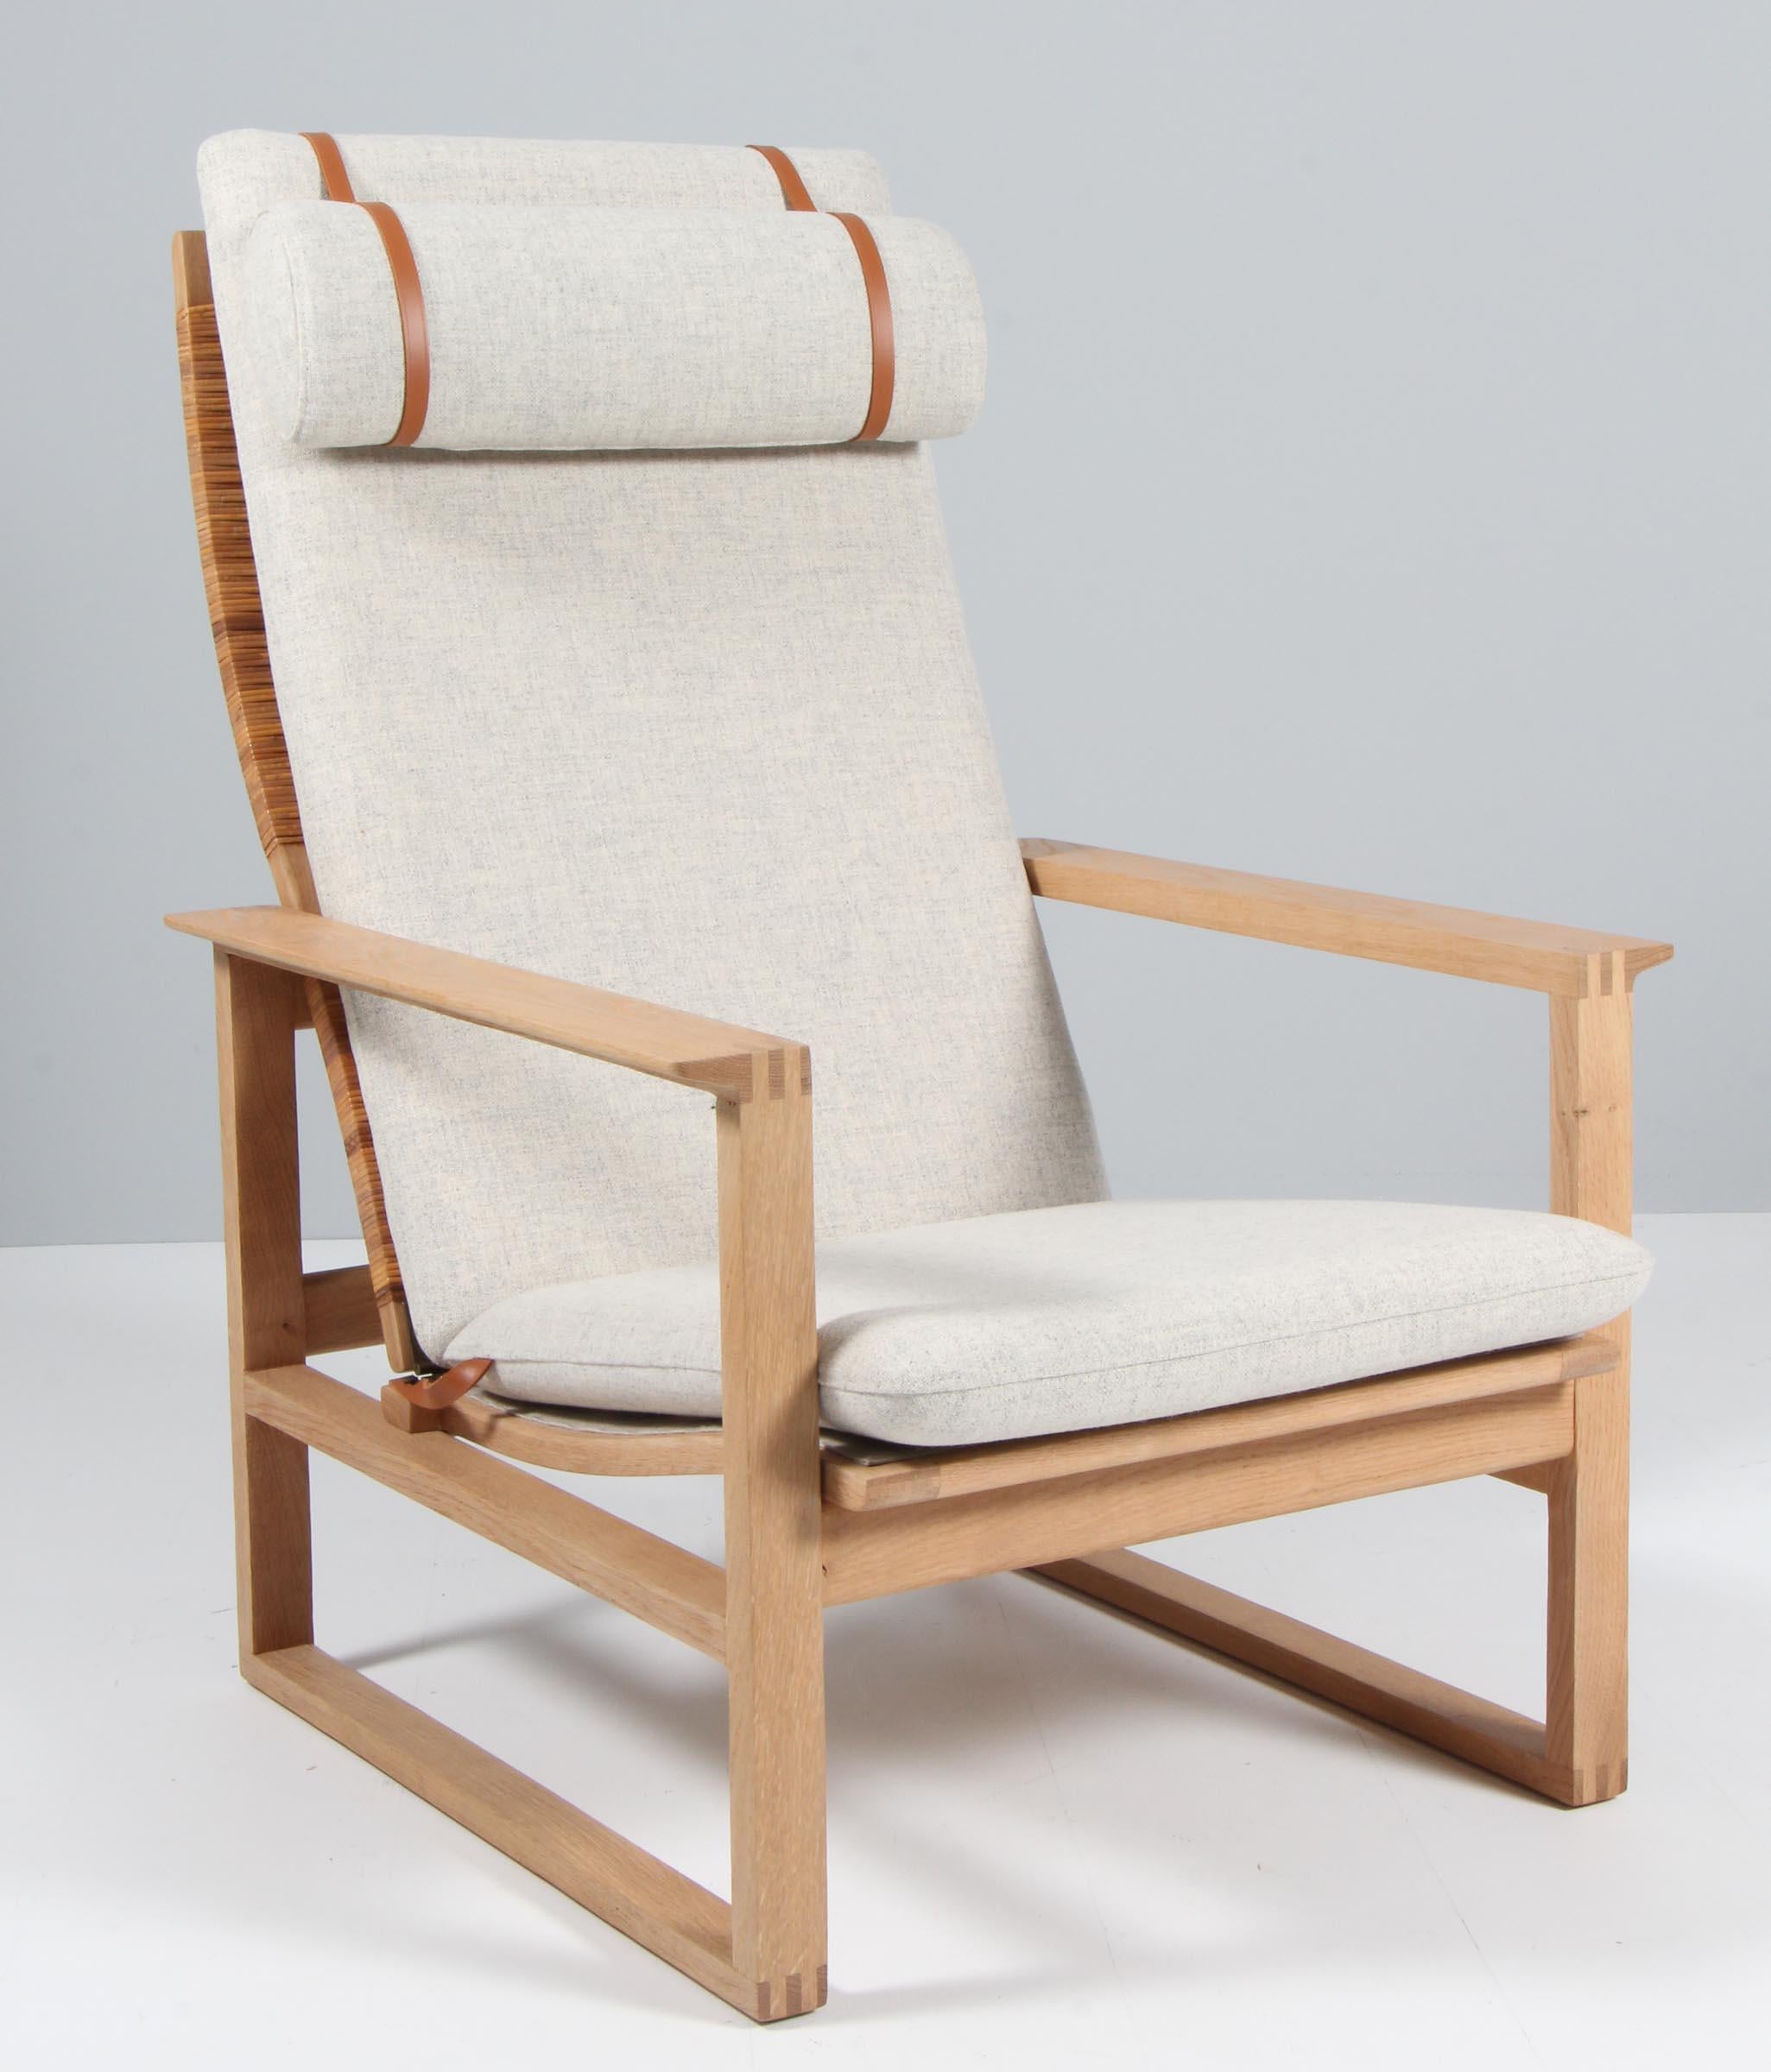 A Børge Mogensen lounge chair designed in 1956 model number 2254 for Fredericia Stolefabrik. Cubical frames made of solid oak with finger joints and cane. This high back model 2254 also reclines.

New upholstered in Kvadrat Tonus 2 11, the chair